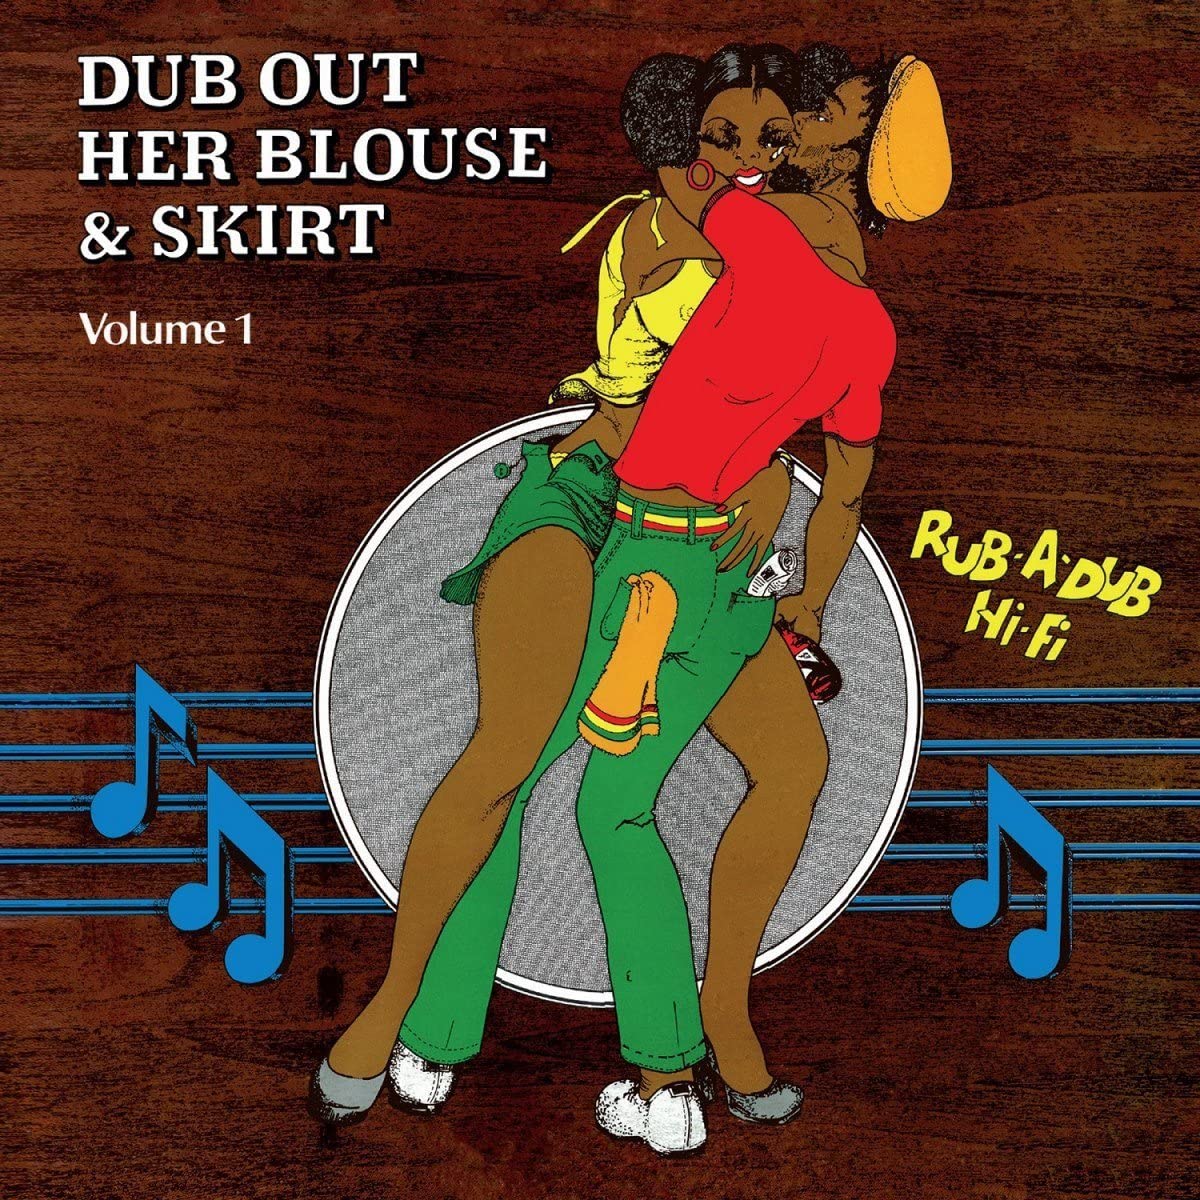 Revolutionaries/Dub Out Her Blouse and Skirt Vol. 1 [LP]